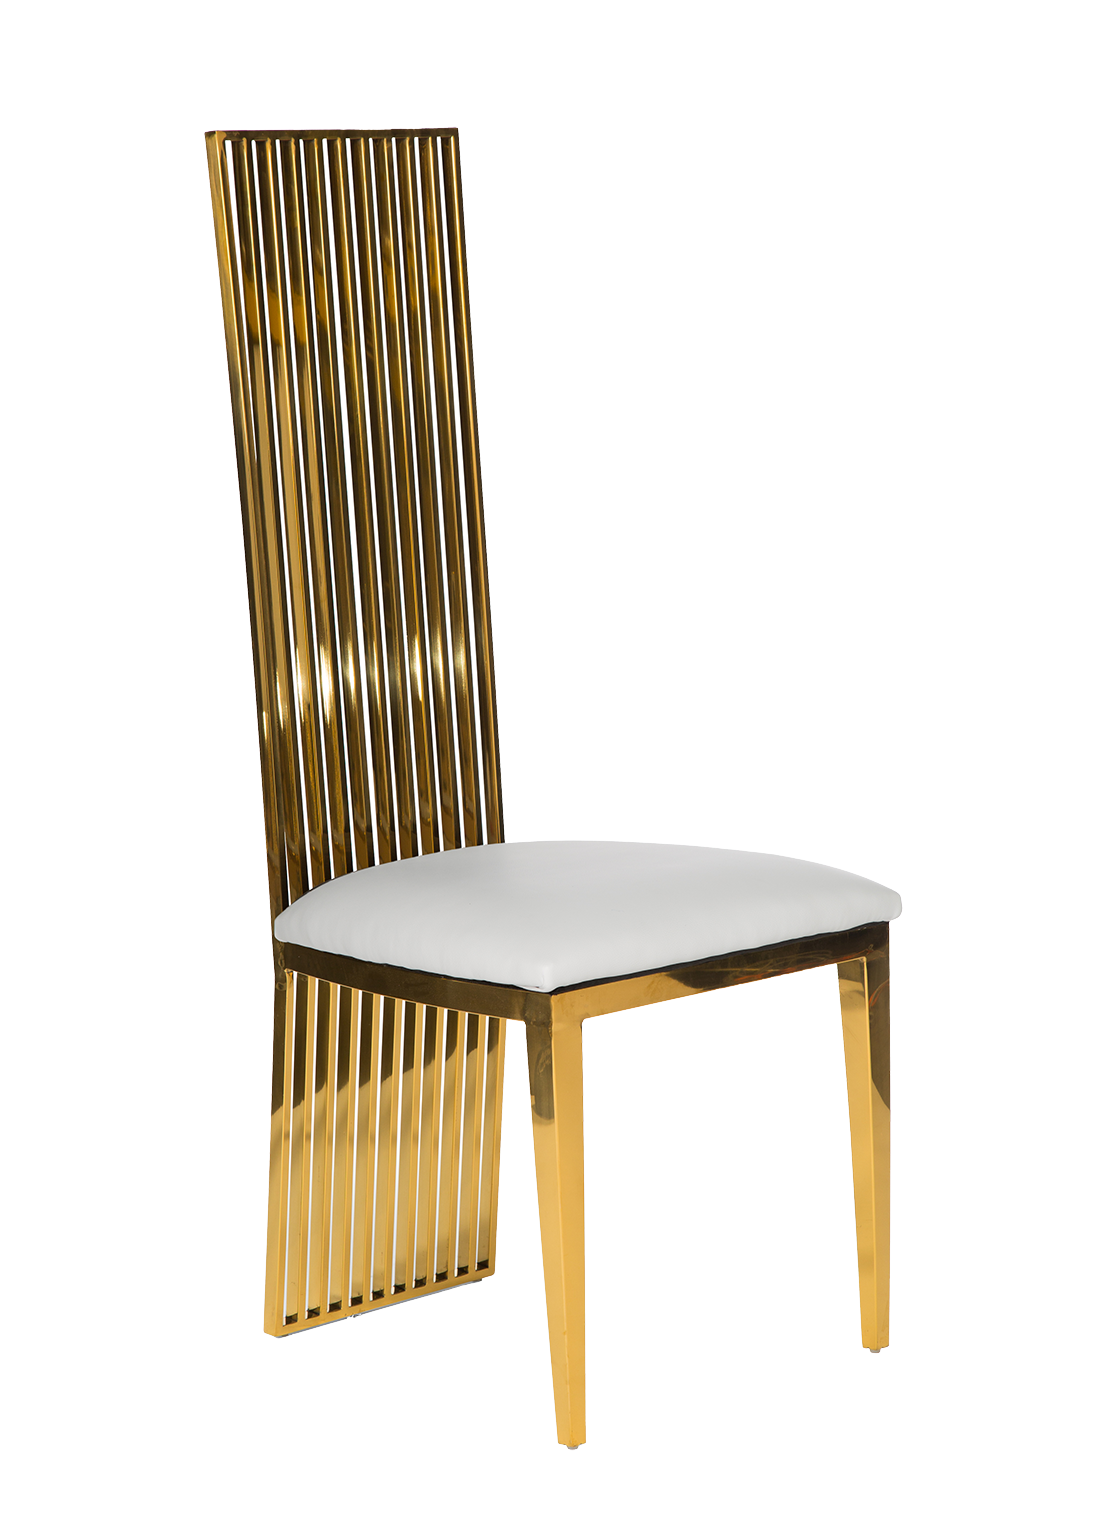 A modern chair with a high, vertical slat backrest in polished gold finish and a white cushioned seat, isolated on a white background.